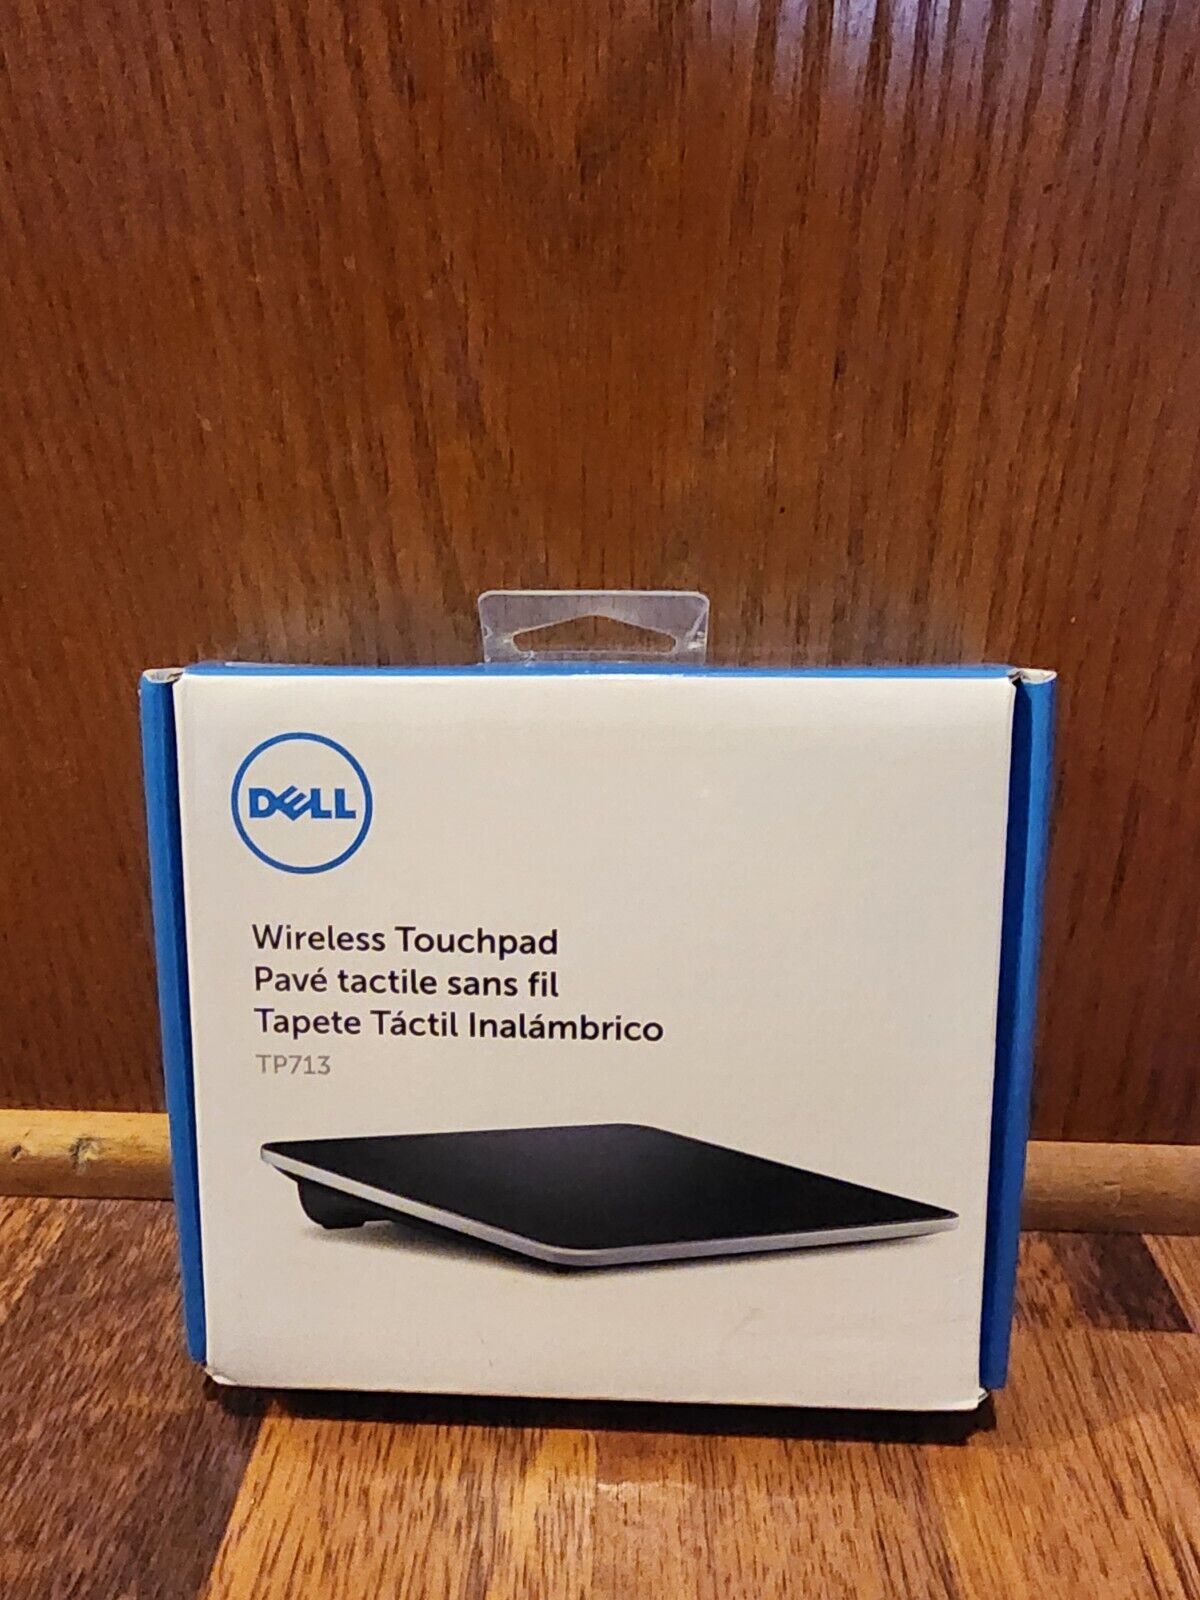 Dell TP713 Wireless Touchpad with USB Receiver, Inserts And Box Tested